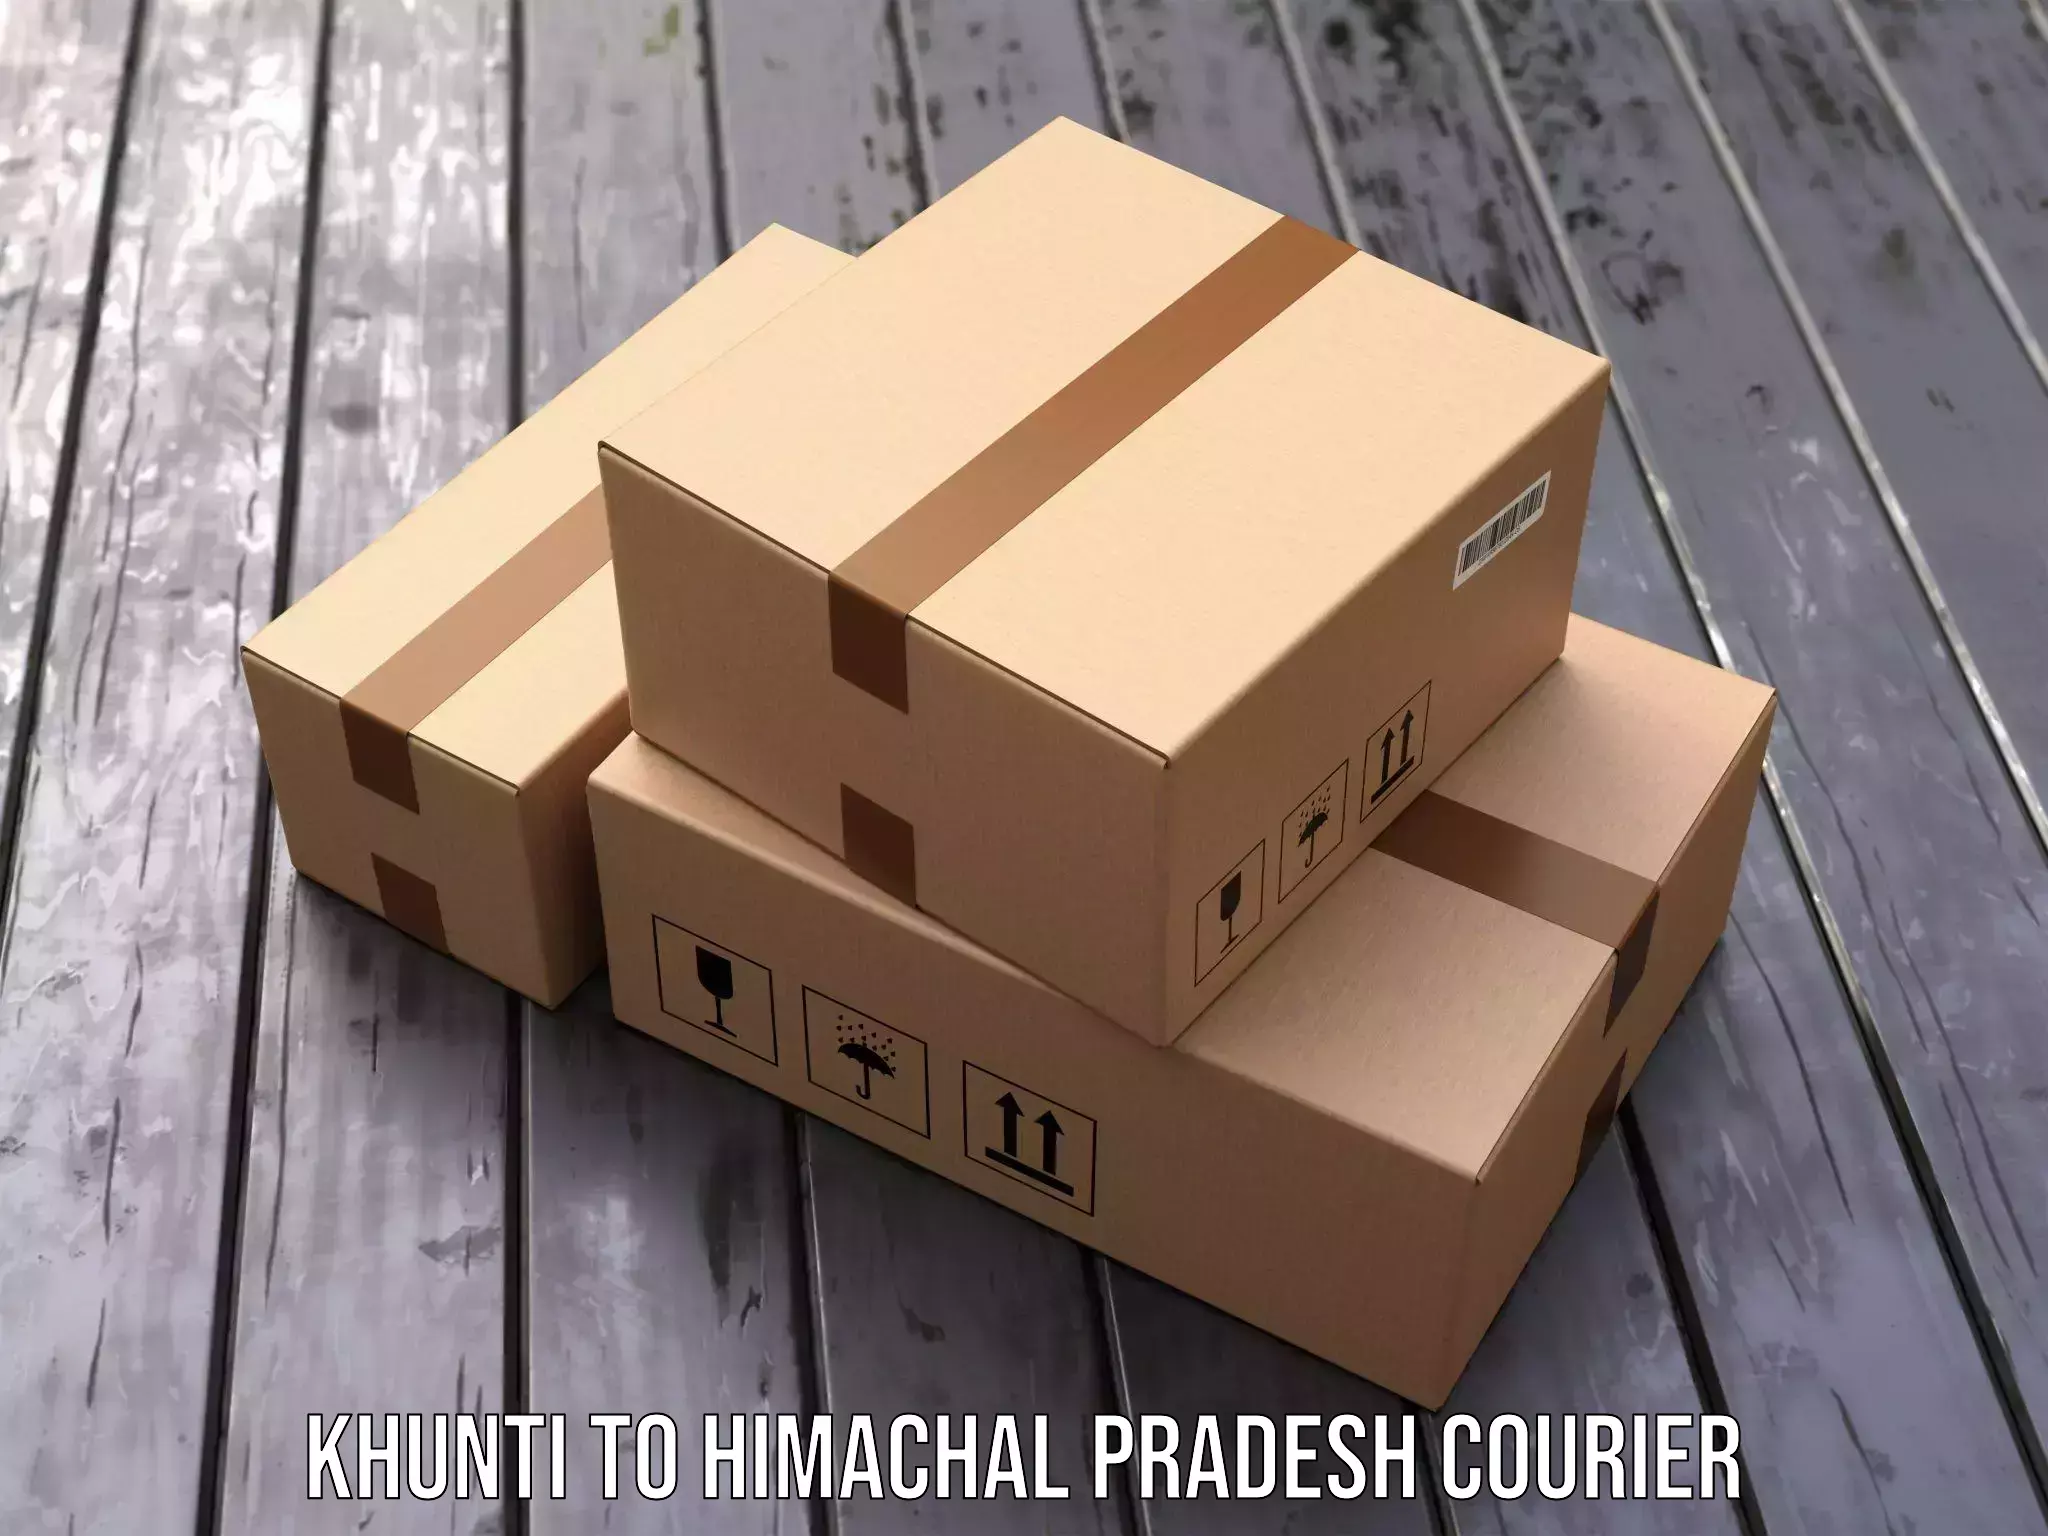 Reliable courier service in Khunti to Joginder Nagar